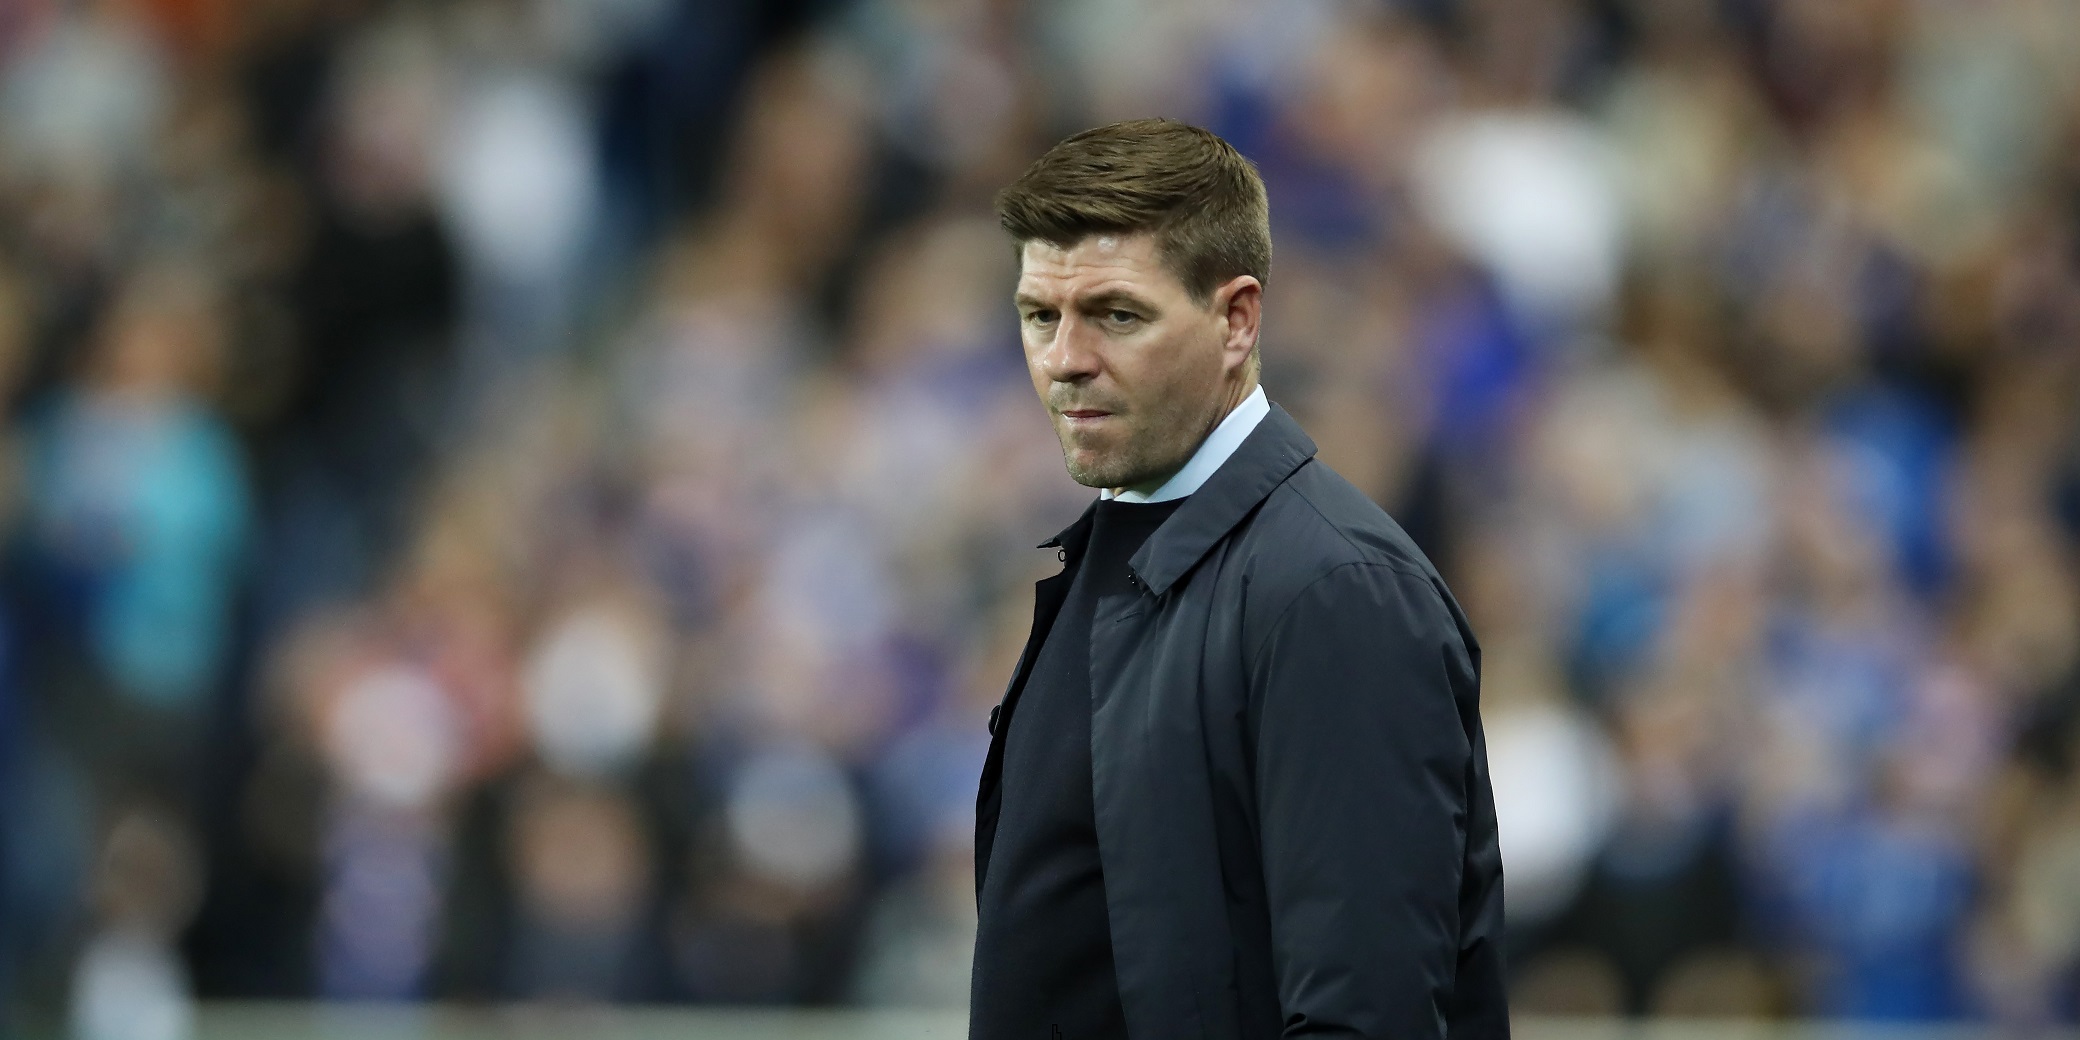 Steven Gerrard expected to be announced as Aston Villa boss in ‘next 24 to 48 hours’, claims club writer